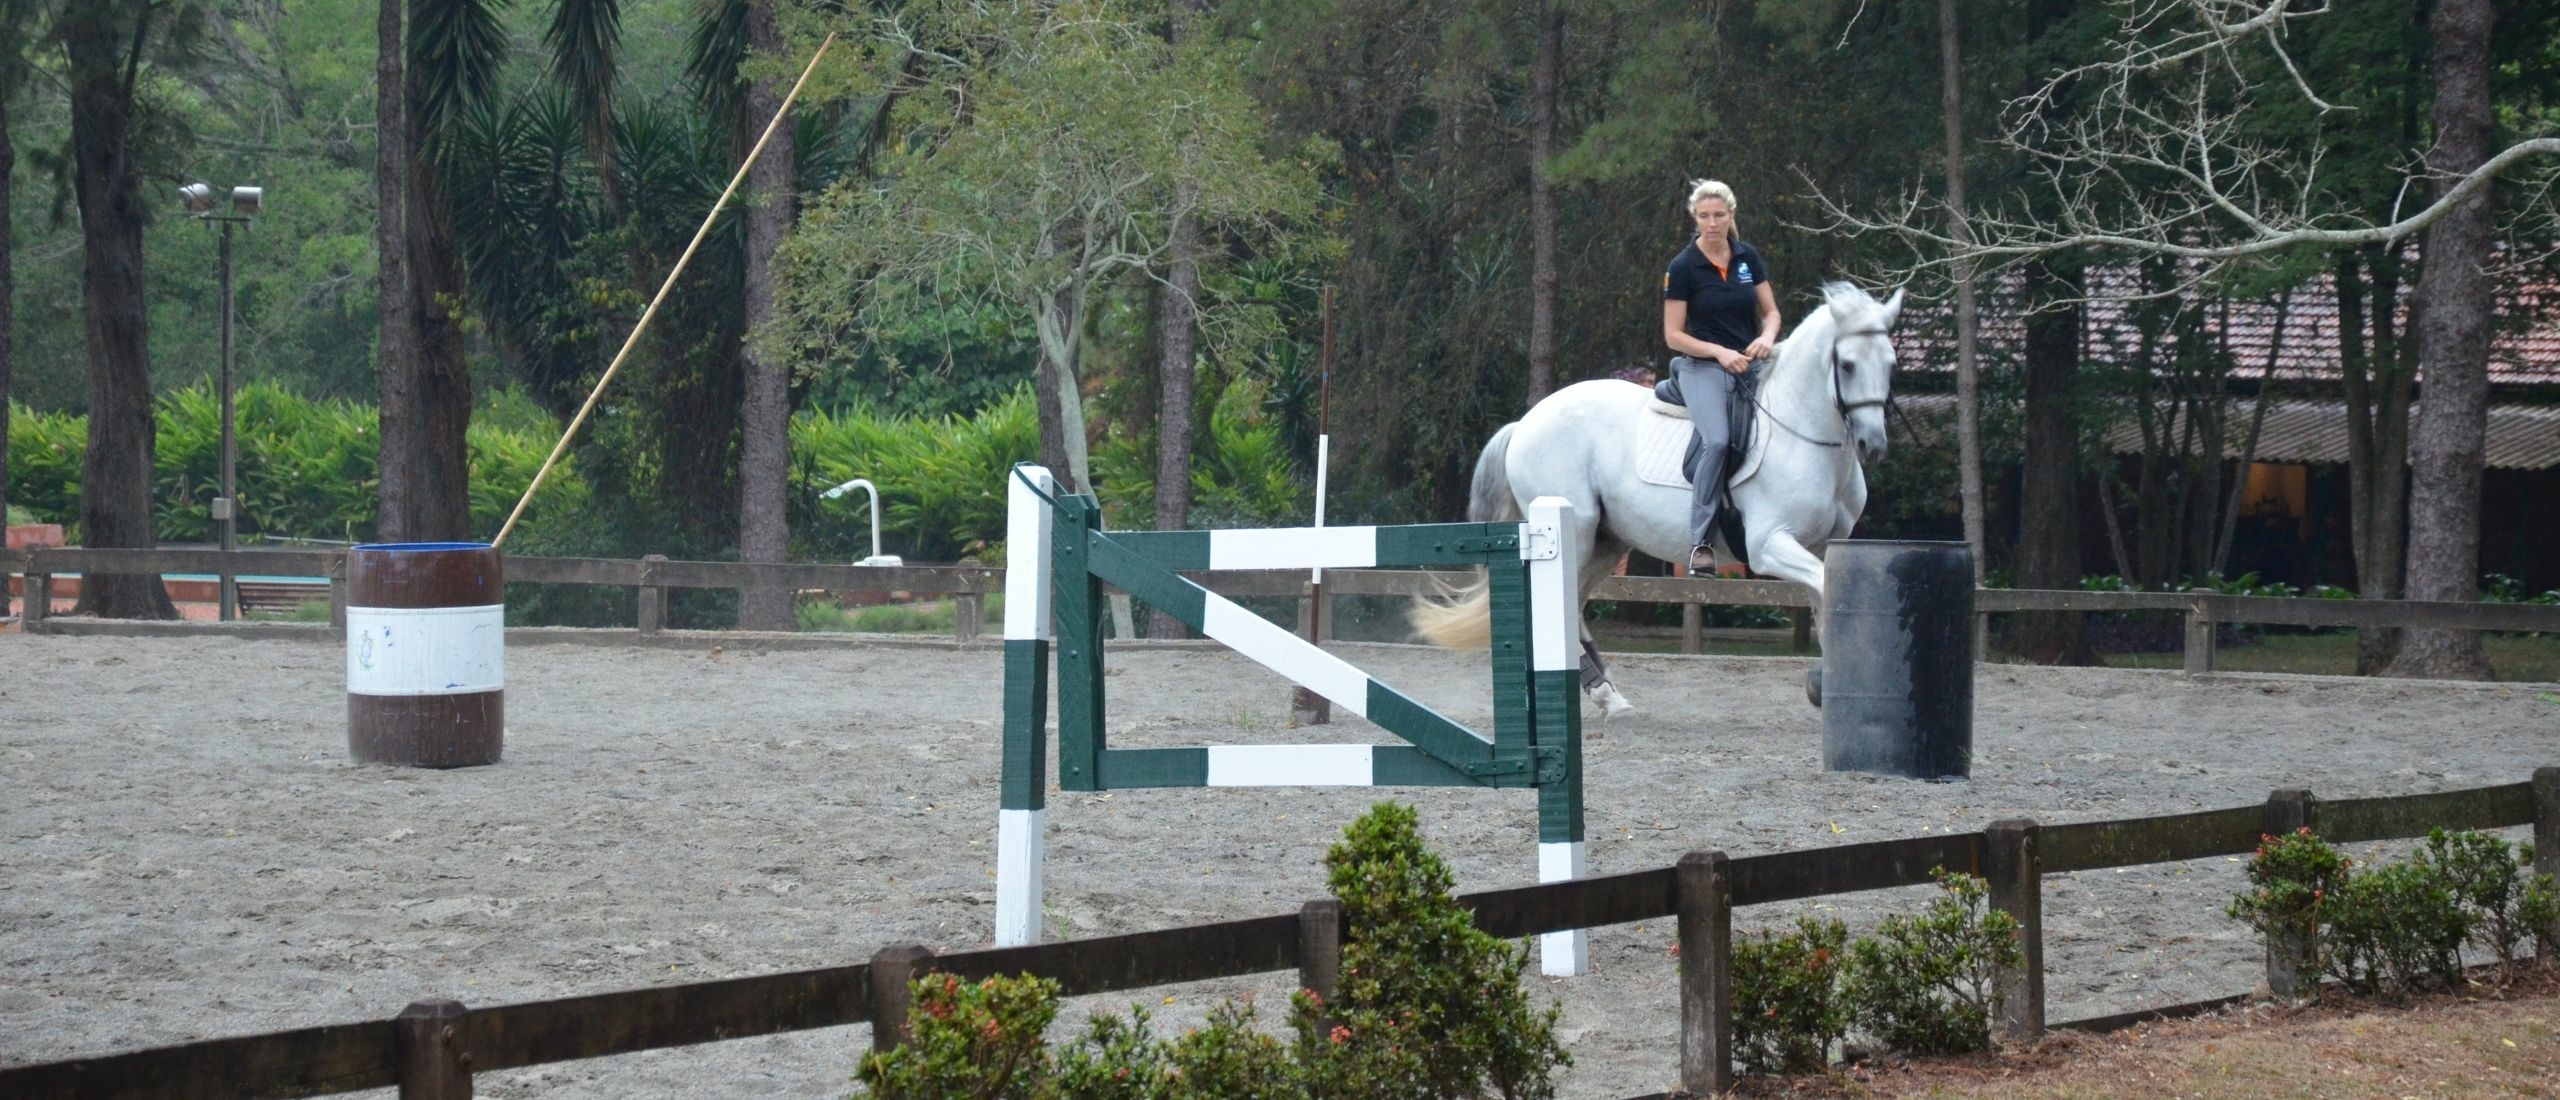 Working Equitation for the first time